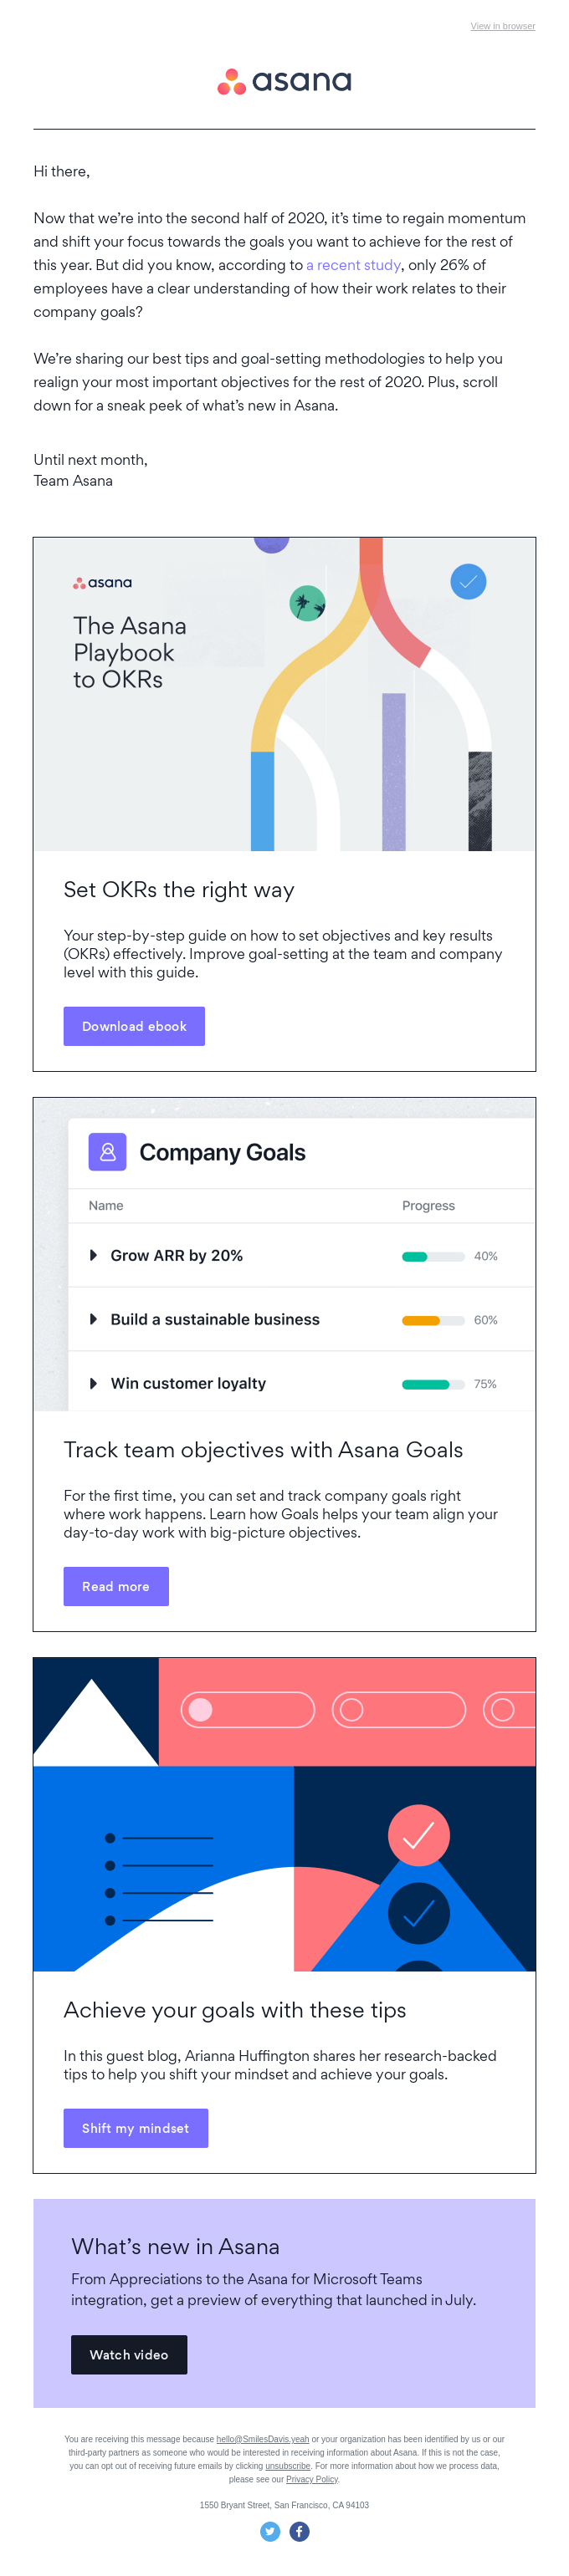 Mid-year goals check-in